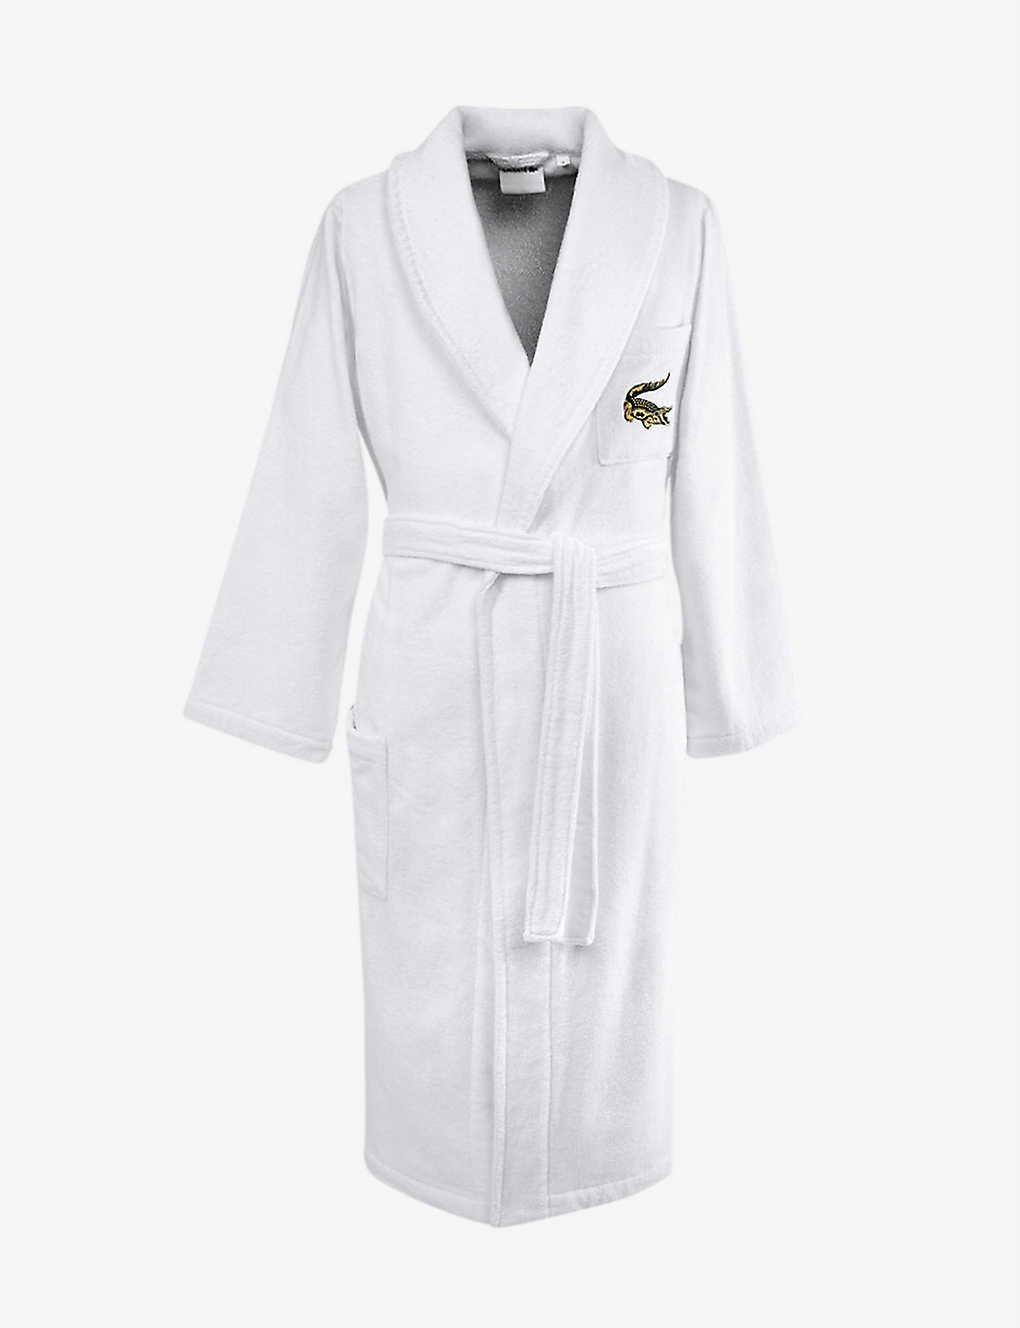 LACOSTE Rene dressing gown | REVERSIBLE